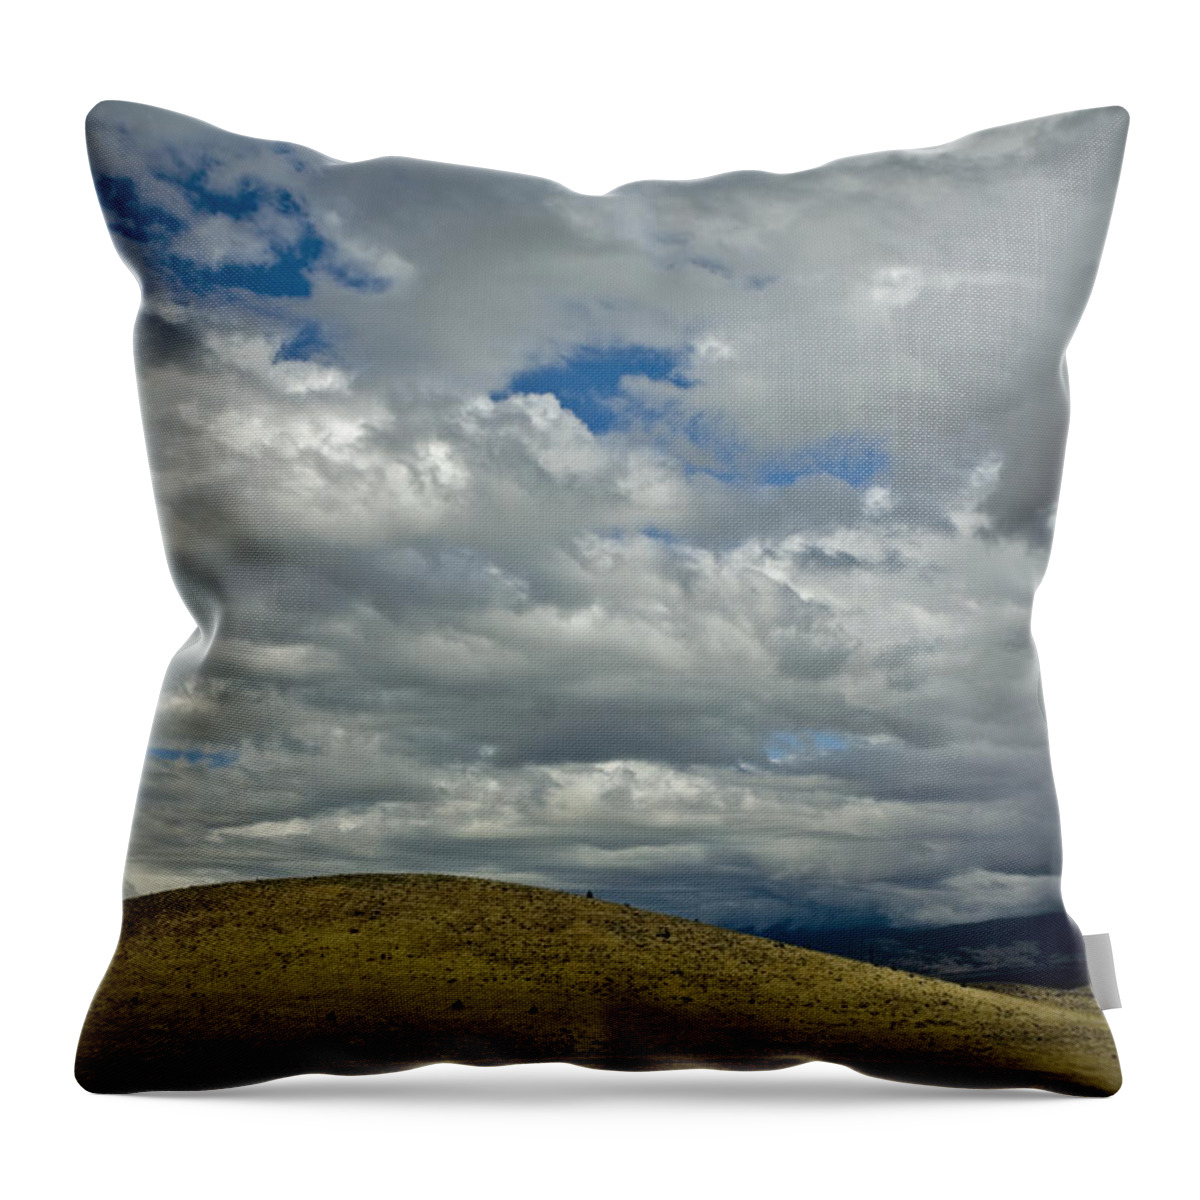 Rolling Hills Throw Pillow featuring the photograph Rolling Hills by Bonnie Bruno